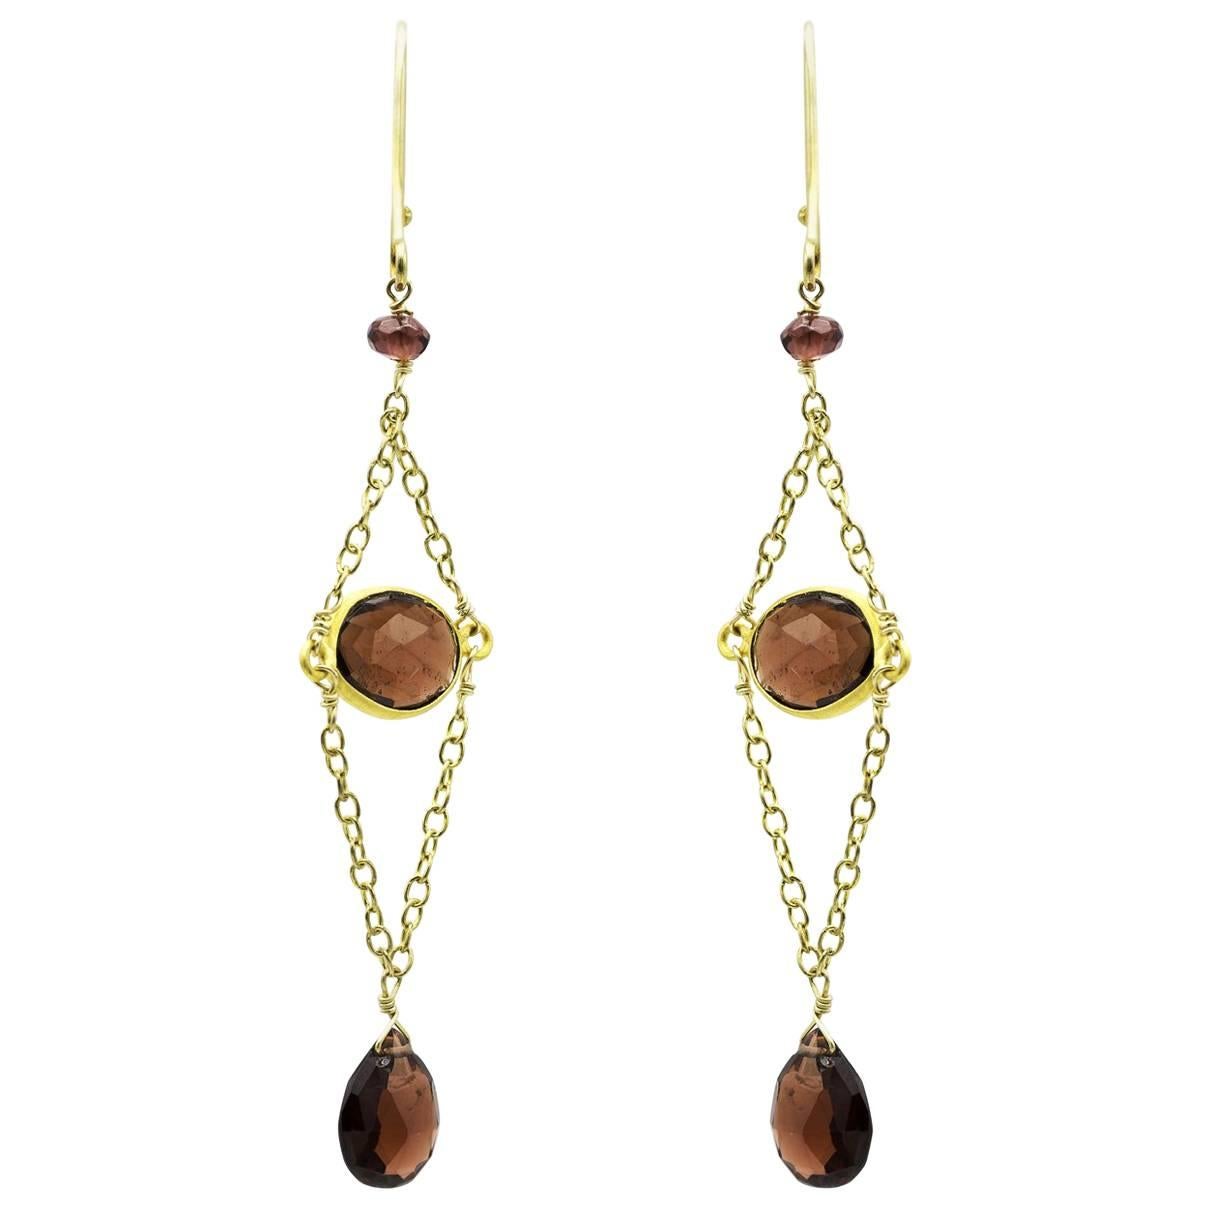 Garnet and Gold Chain Earrings with Faceted Bead Briolettes